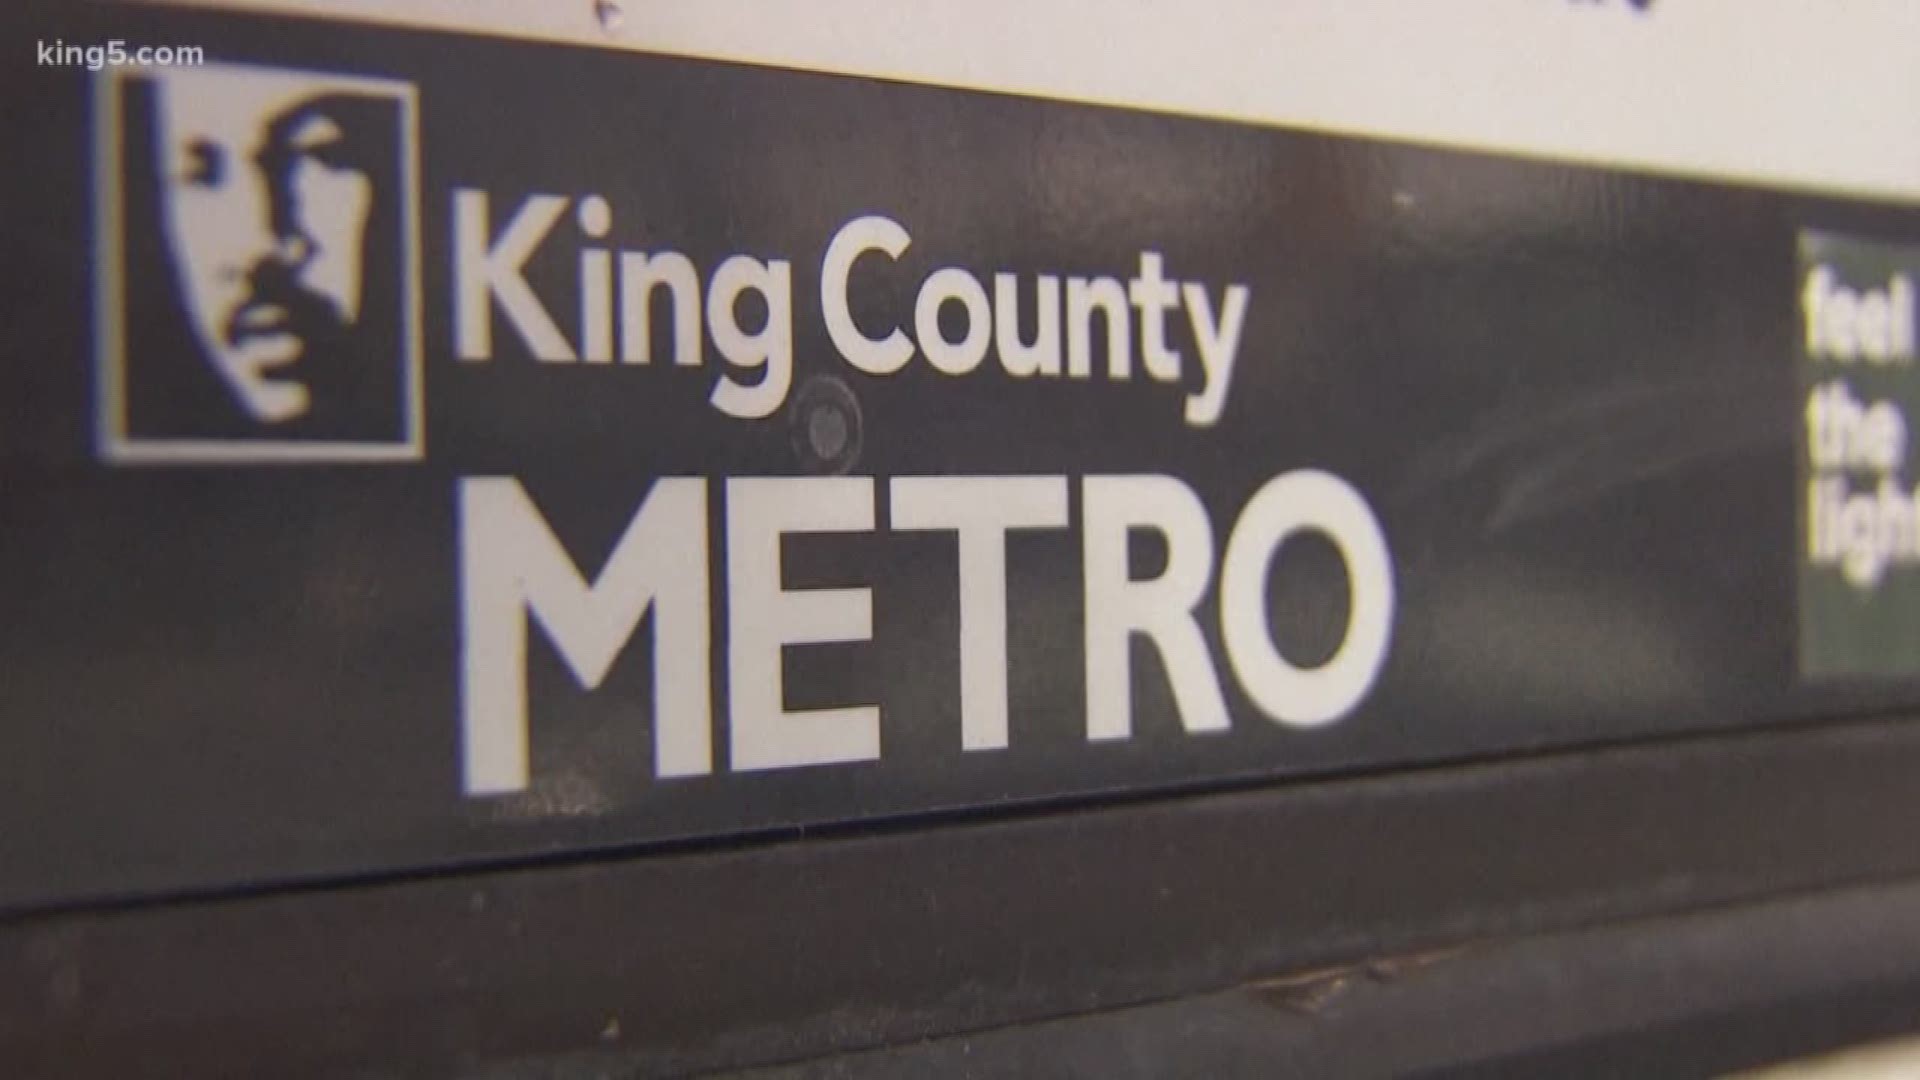 A senior security official with King County Metro has been arrested, accused of the rape and trafficking of a teenager. Police believe he made her work as a prostitute in King and Snohomish counties.